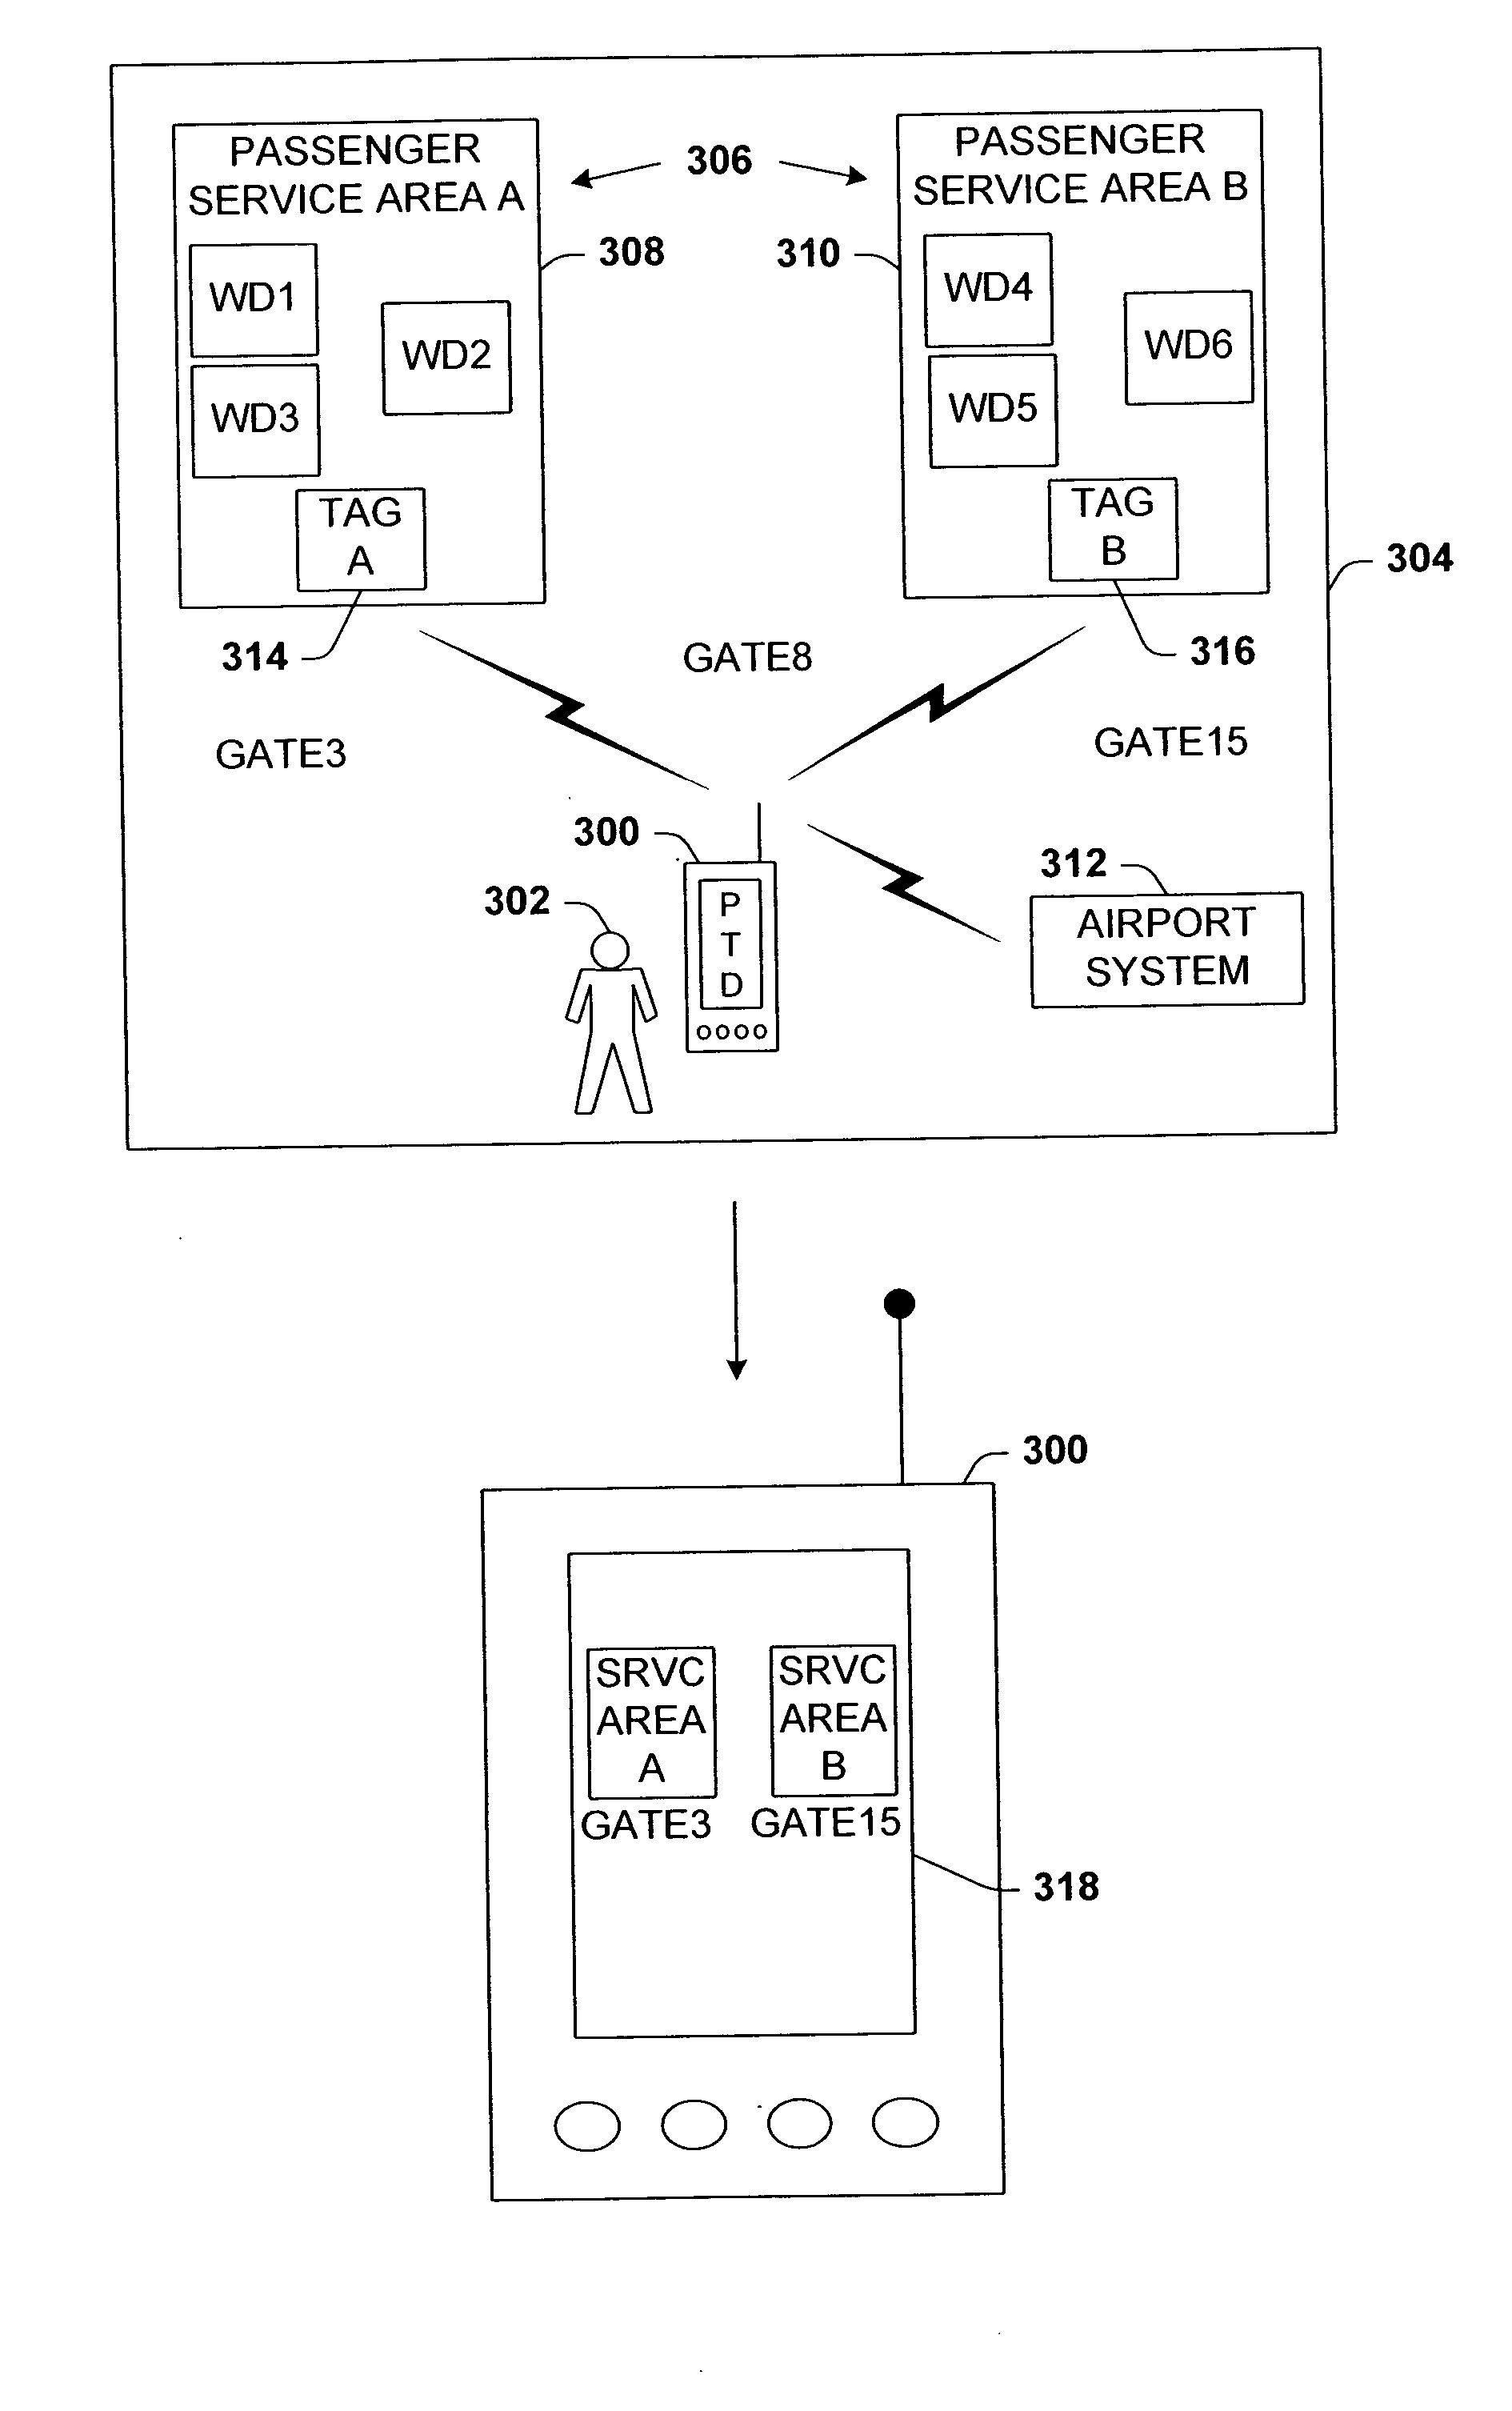 Multi-dimensional graphical display of discovered wireless devices